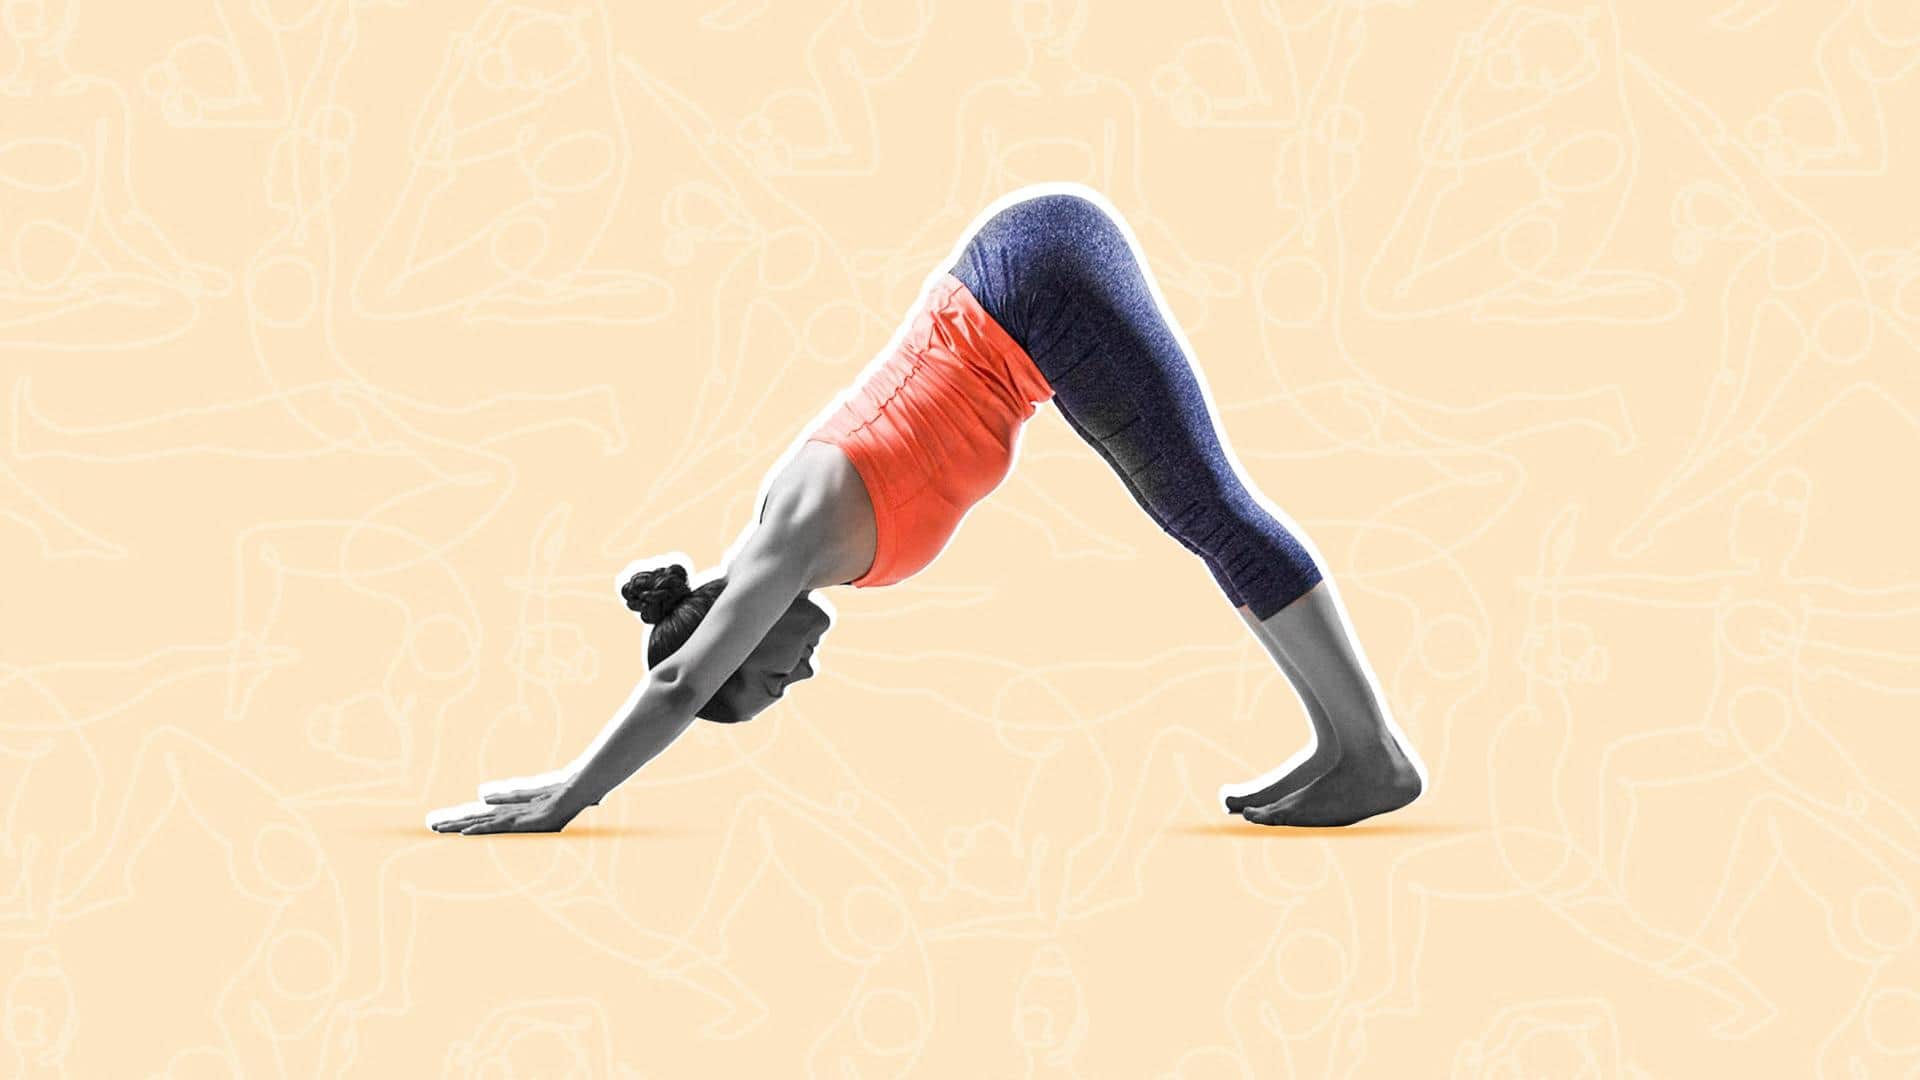 Yoga for toned arms: You must try these beginner-friendly asanas